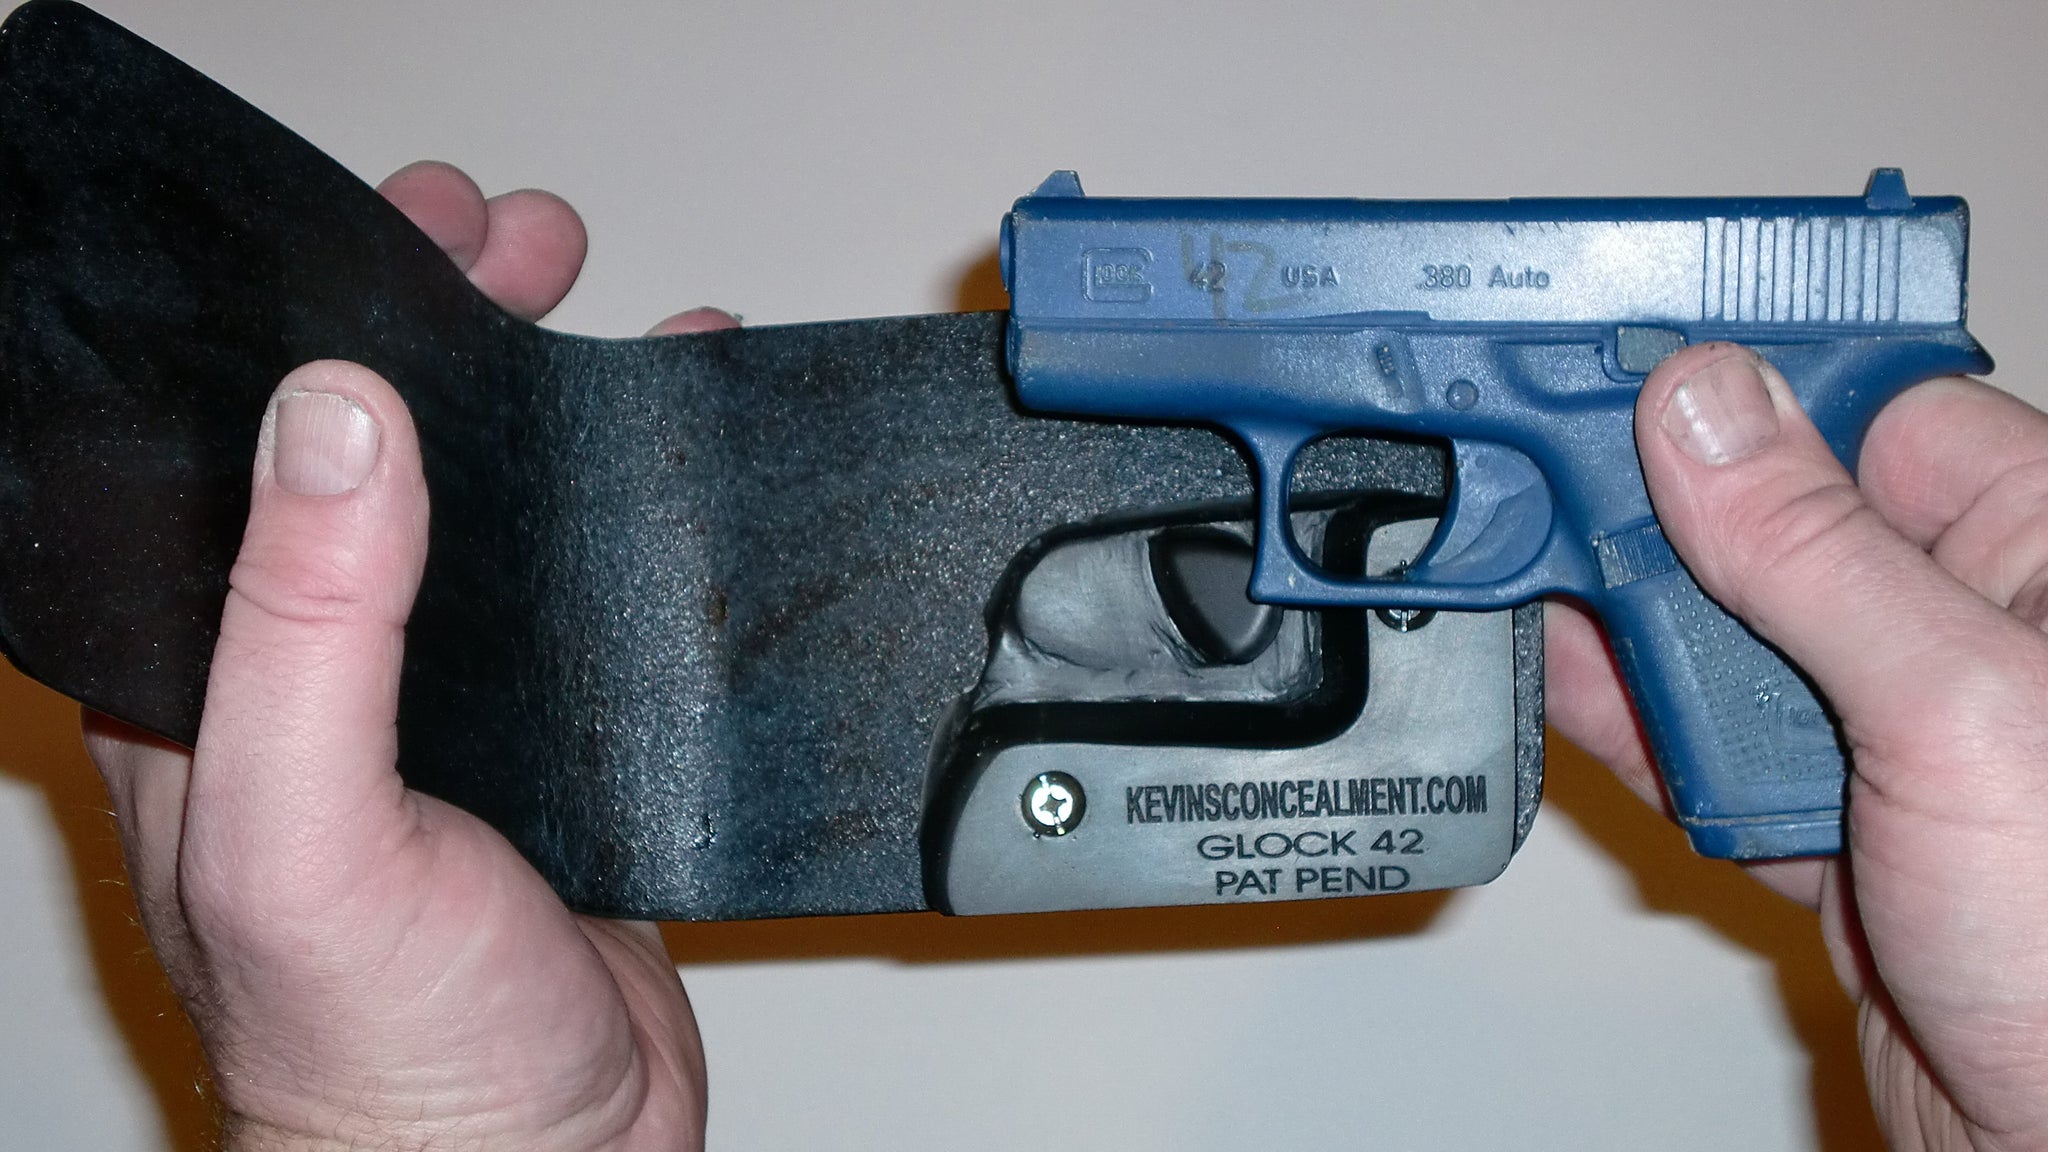 Buy Wallet Pistol - Order wallet Pistol - Wallet pistol for sale